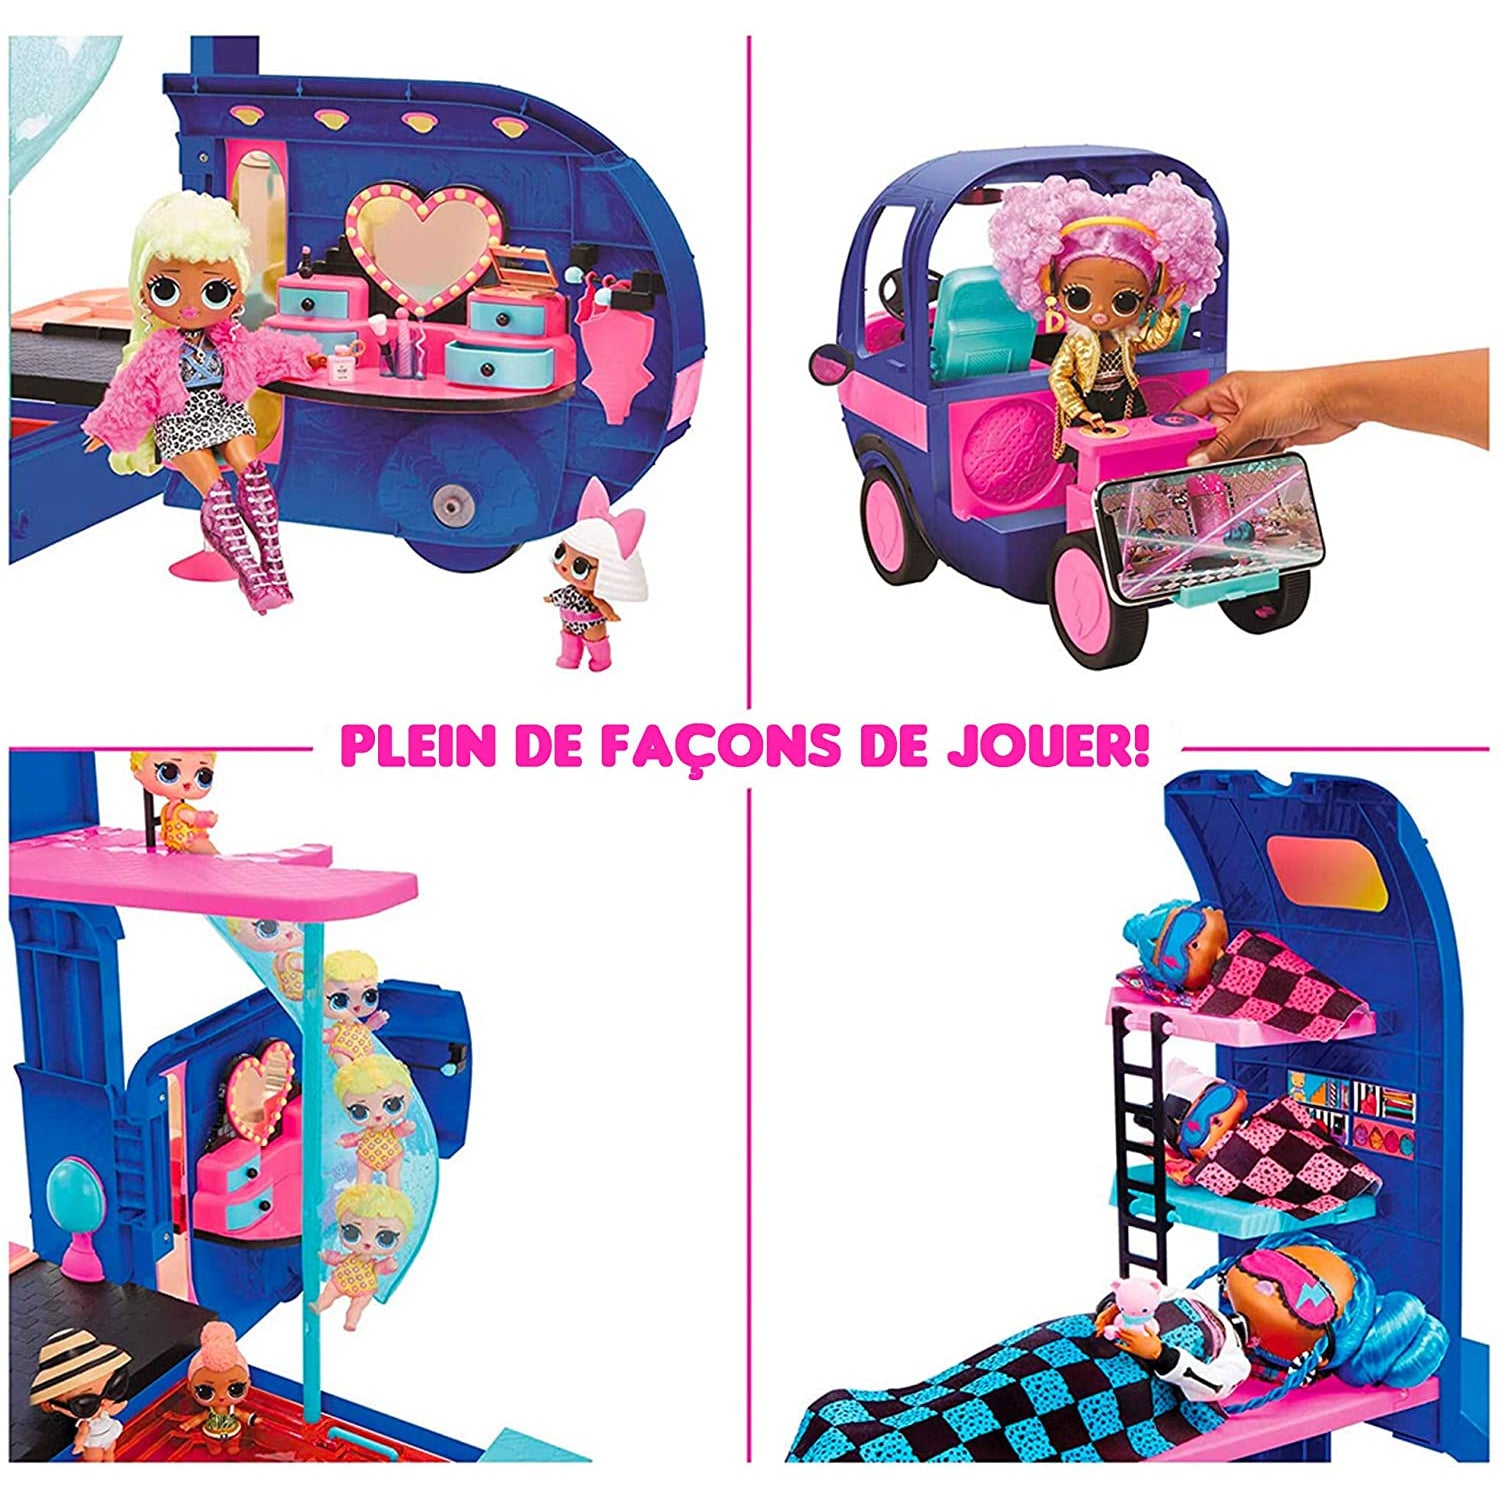 LOL Surprise 2-in-1 Glamper Fashion Camper With 55+ Surprises, Great Gift  for Kids Ages 4 5 6+ 